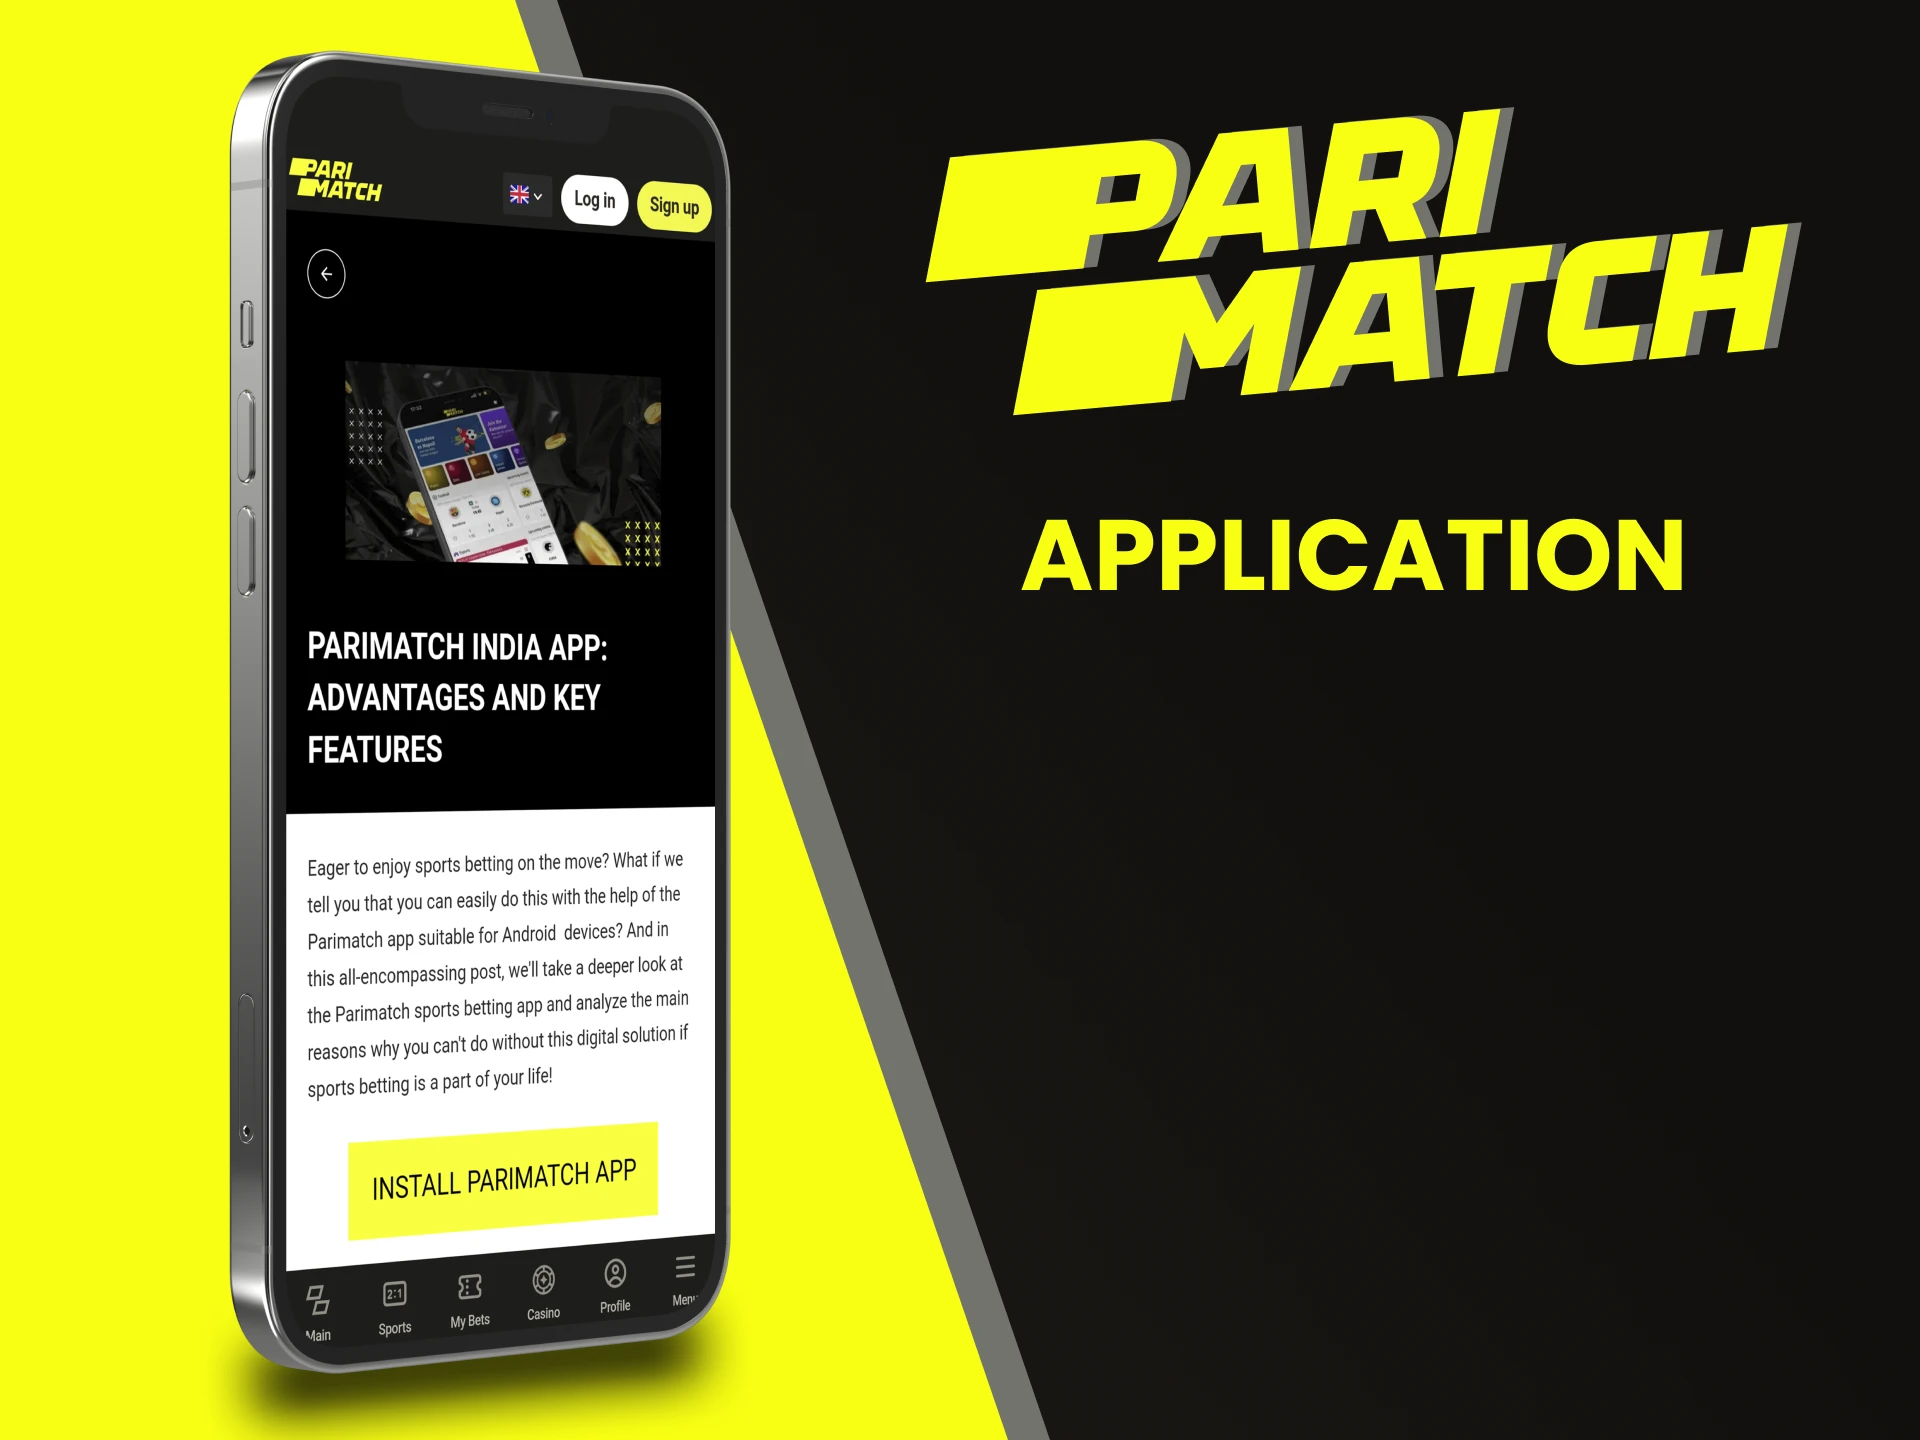 You can place bets by downloading the Parimatch app.